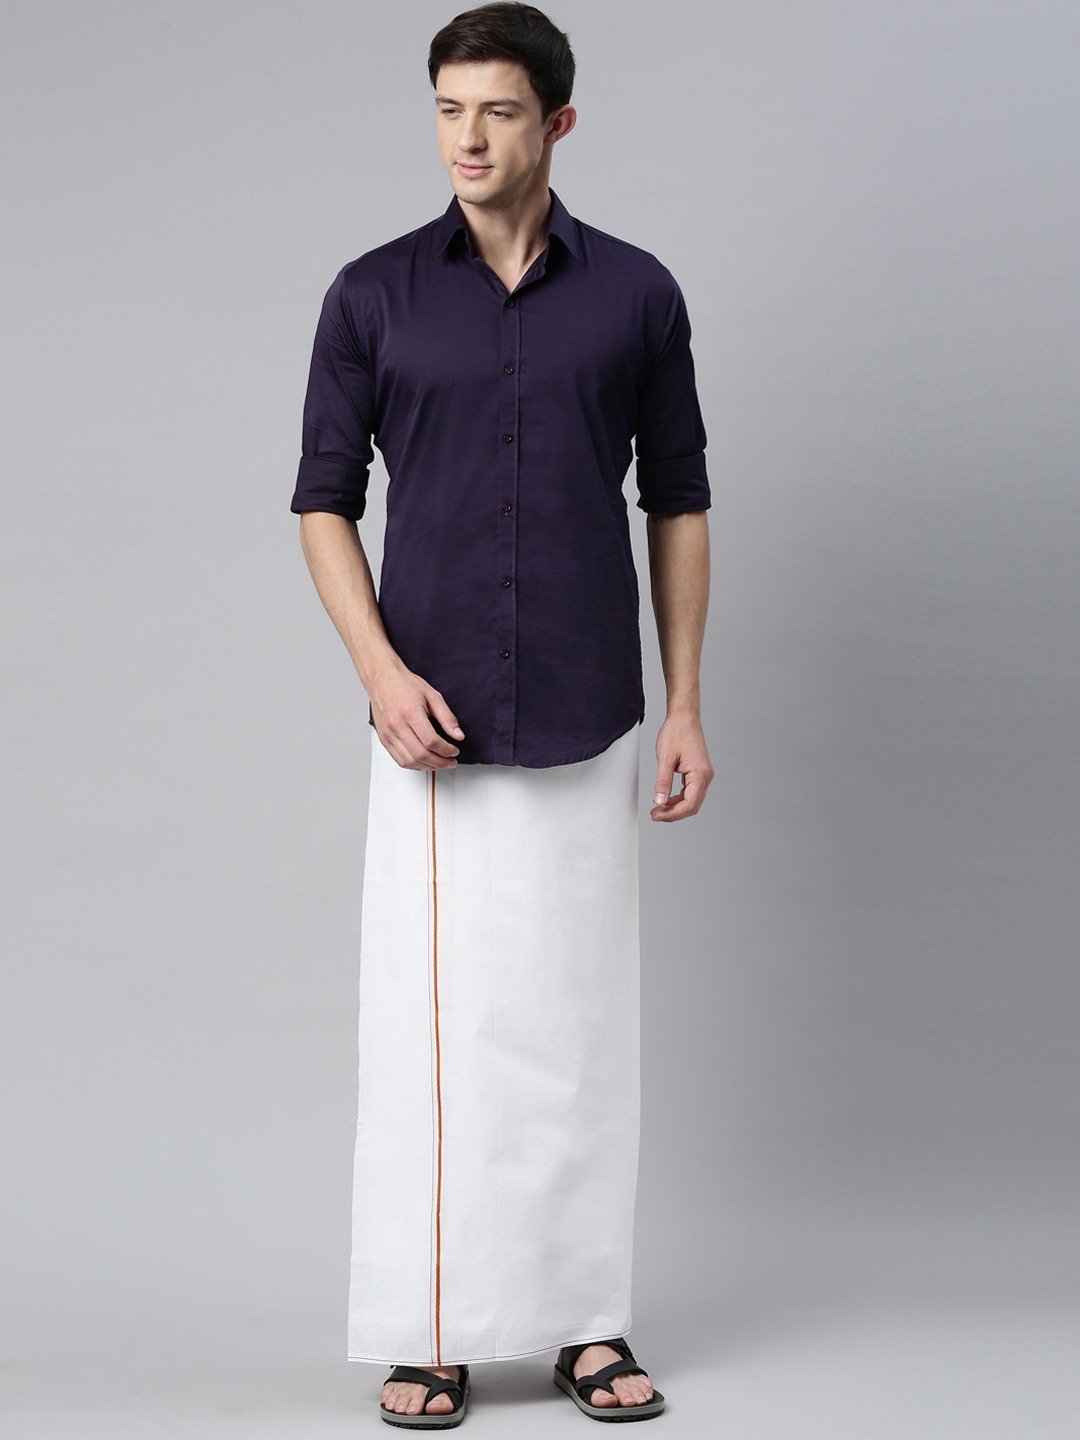 WHITE HEART | White Heart Mens 100% Cotton White Double and Small Border Dhoti - Pack of 2 6